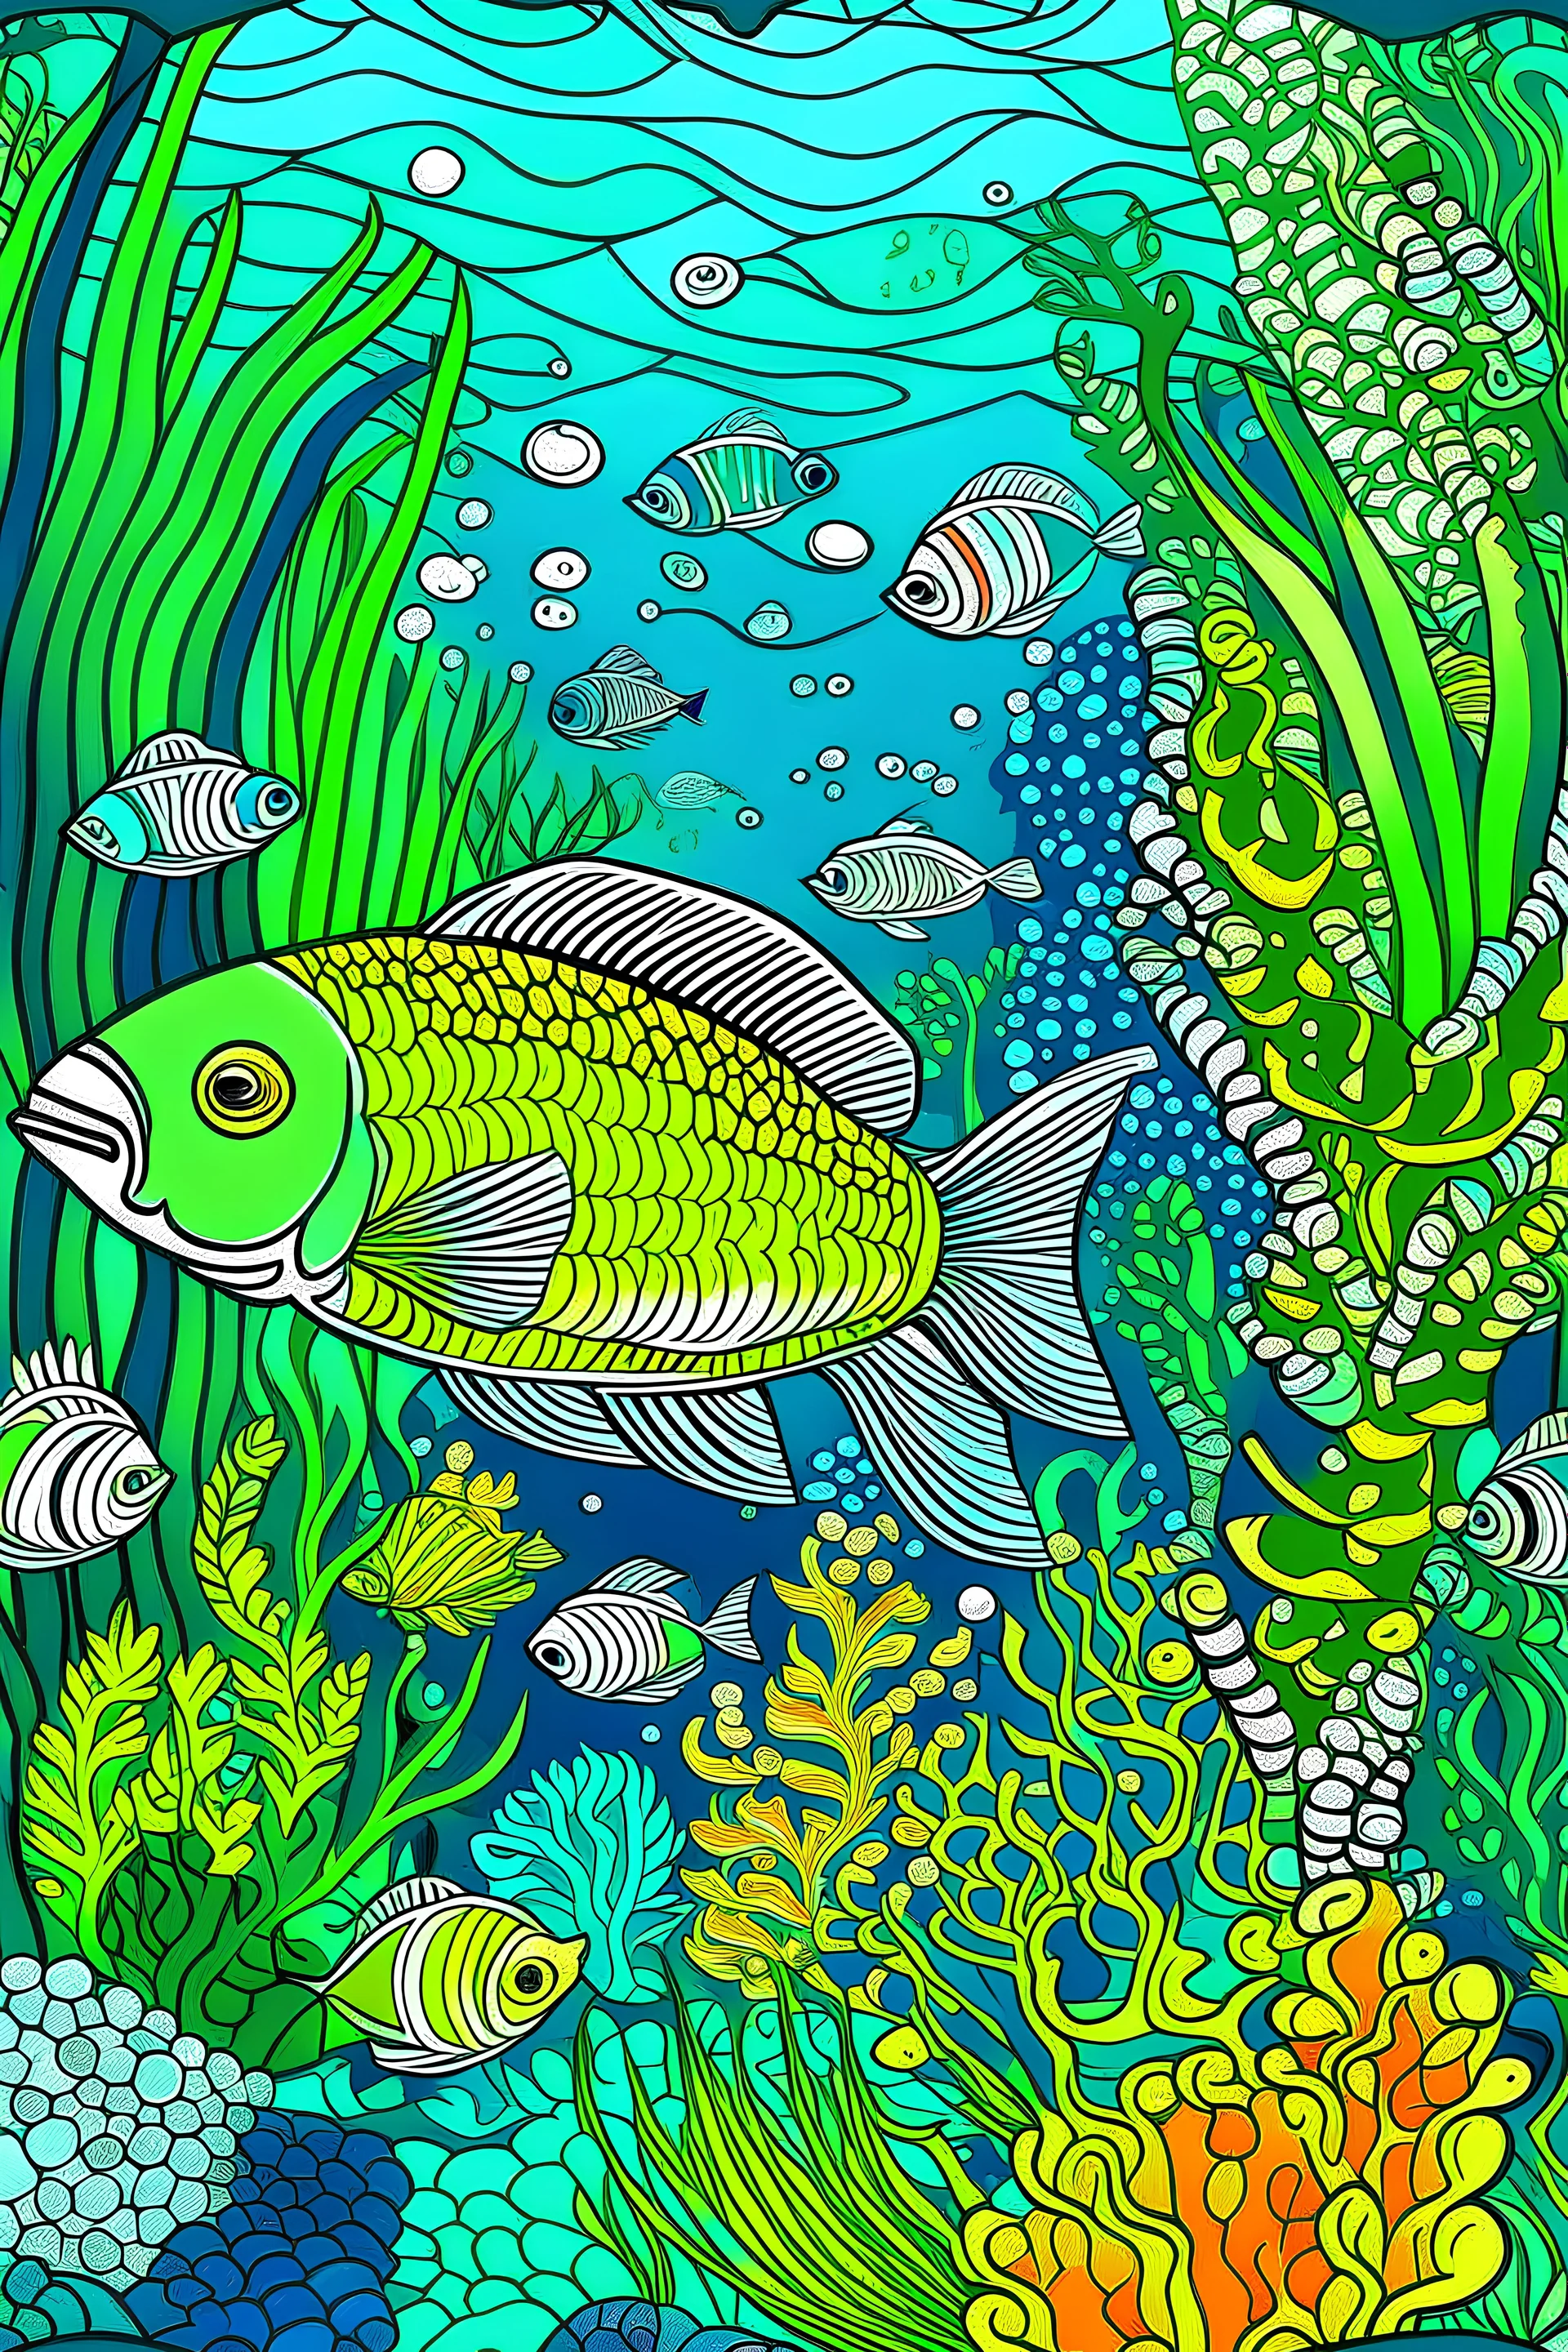 Design a vibrant underwater scene featuring a friendly fish surrounded by coral reefs and seaweed. Make the fish the focal point with intricate patterns and details on its scales. Add a variety of marine life, such as starfish and seashells, to create an engaging and colorful coloring page. Ensure that the background includes a mix of blues and greens to capture the essence of the ocean. Let your creativity flow in crafting a delightful and relaxing coloring experience for users.